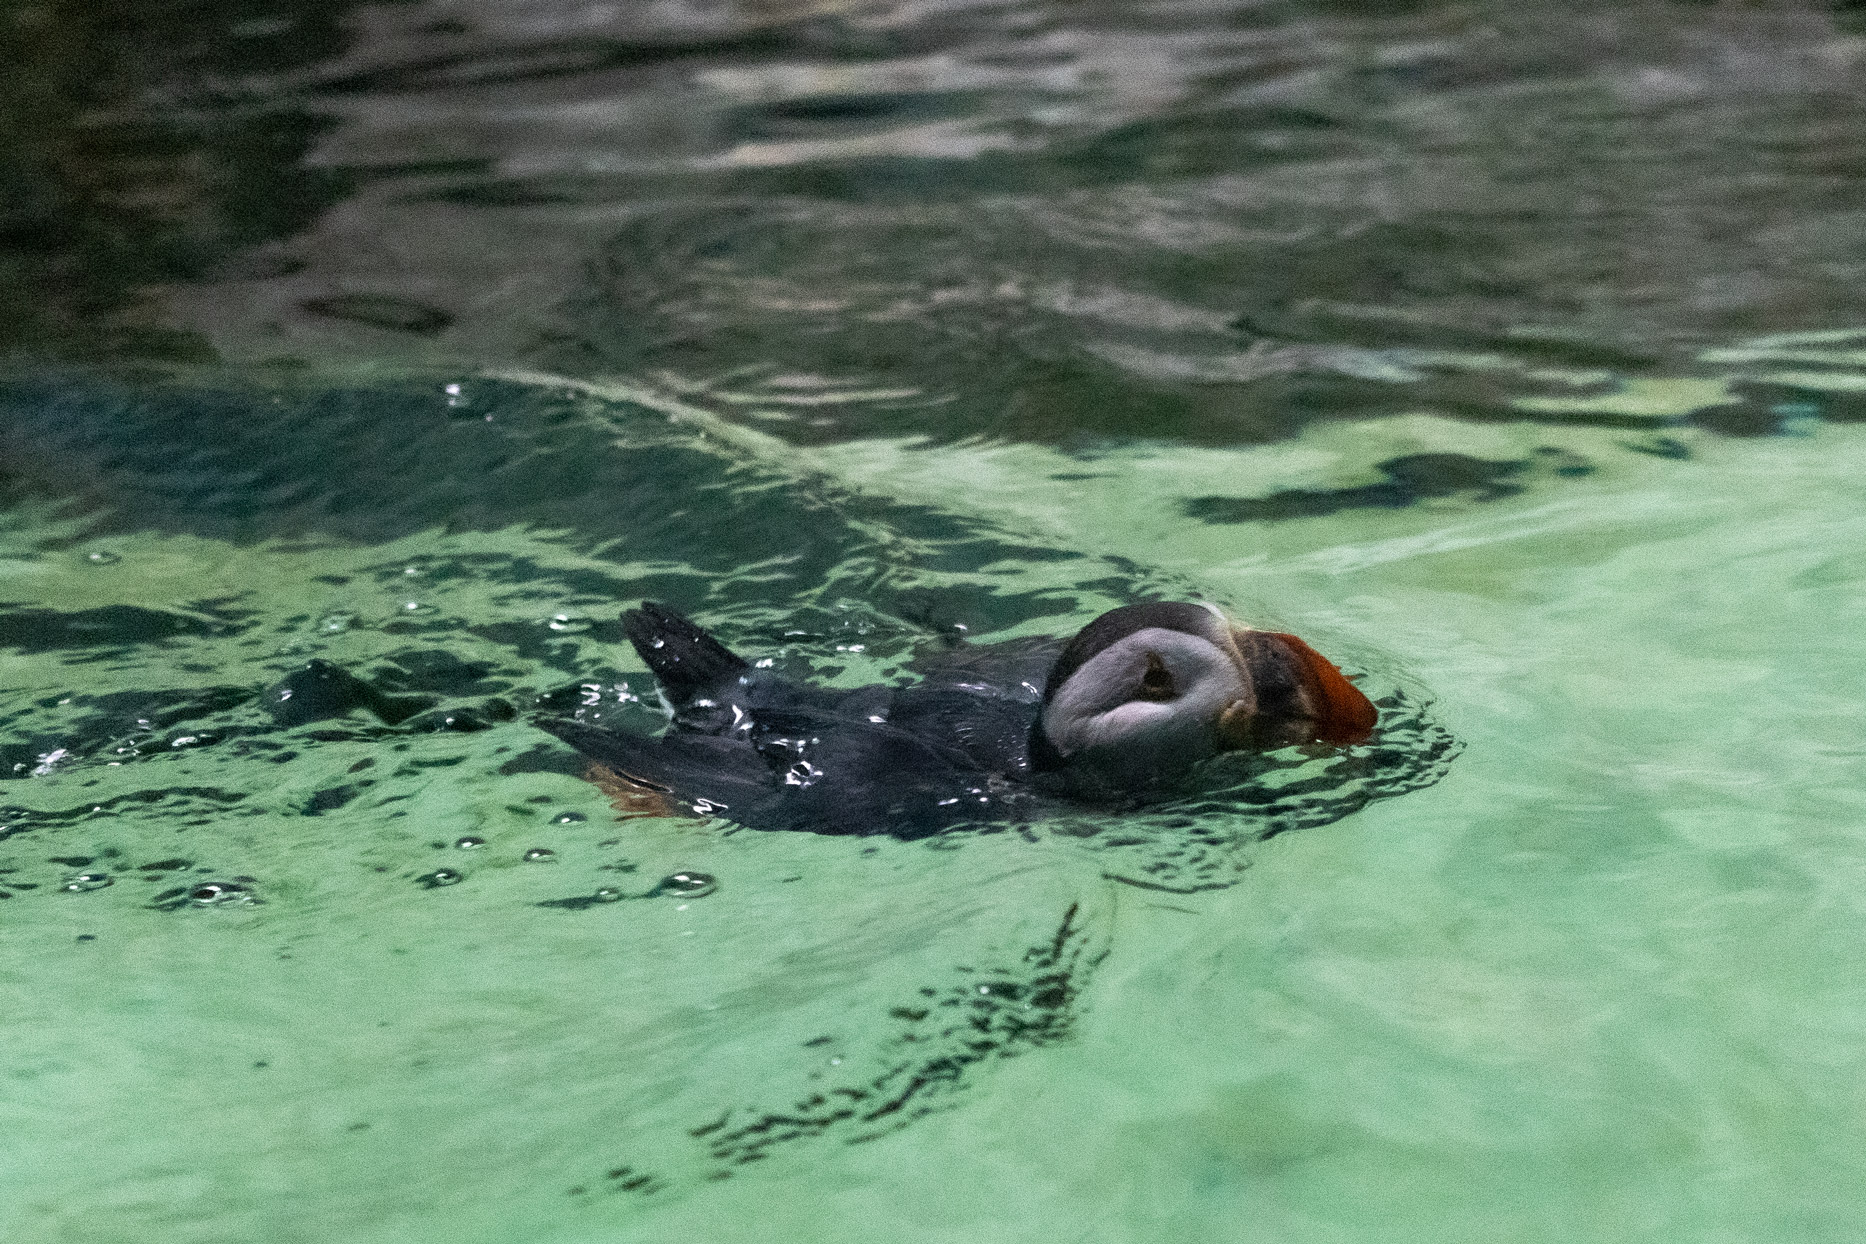 Puffin swimming with its head poking out of the water